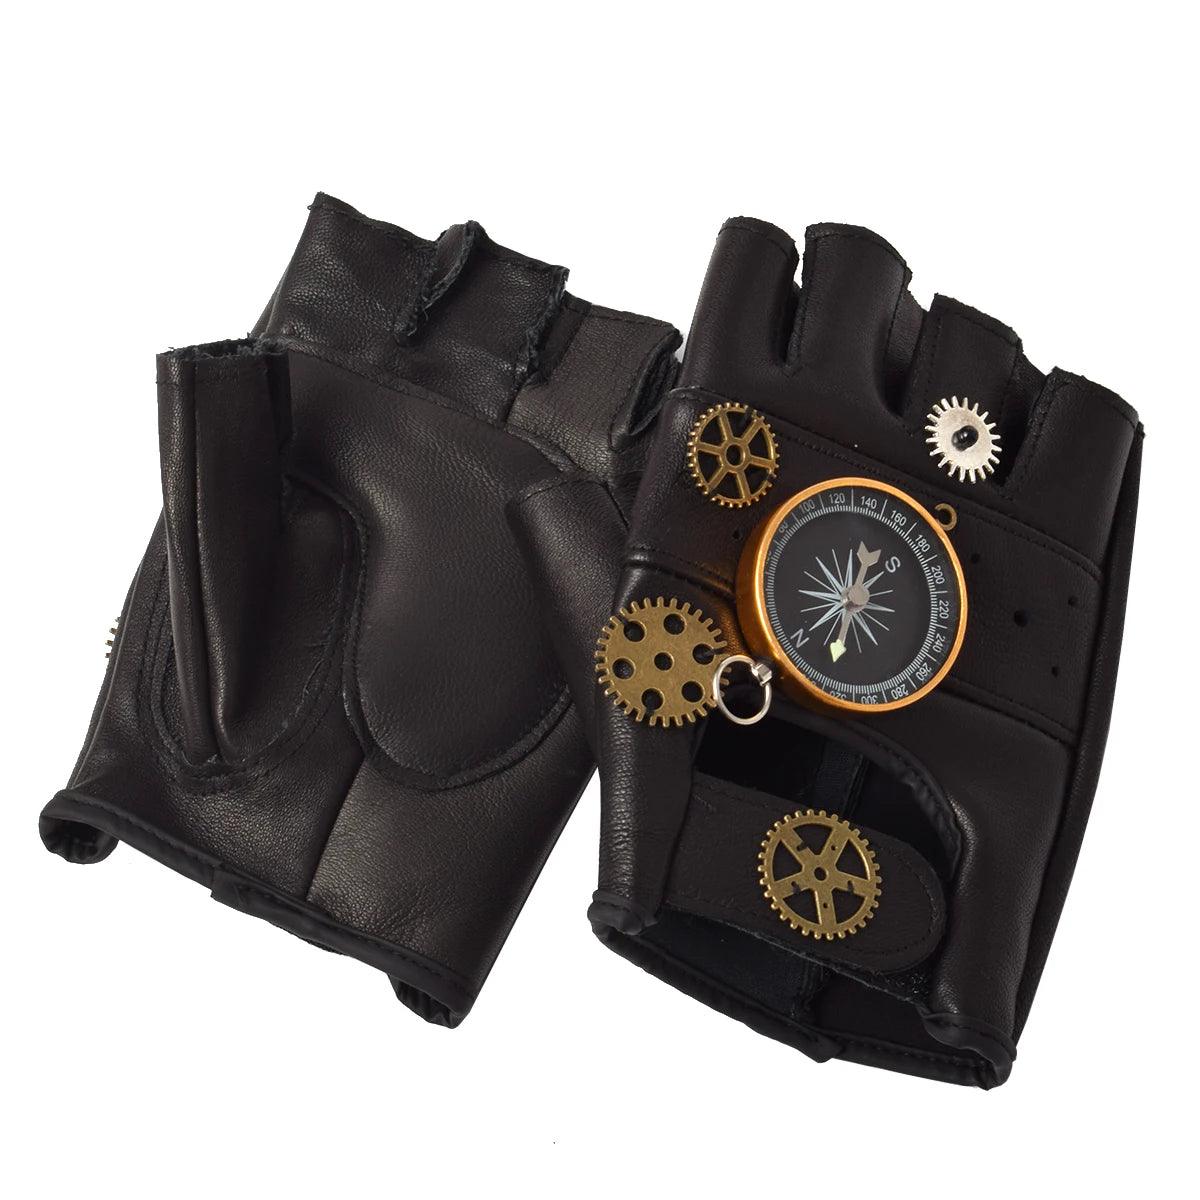 Steampunk Faux Leather Gear Gloves Gloves - The Burner Shop